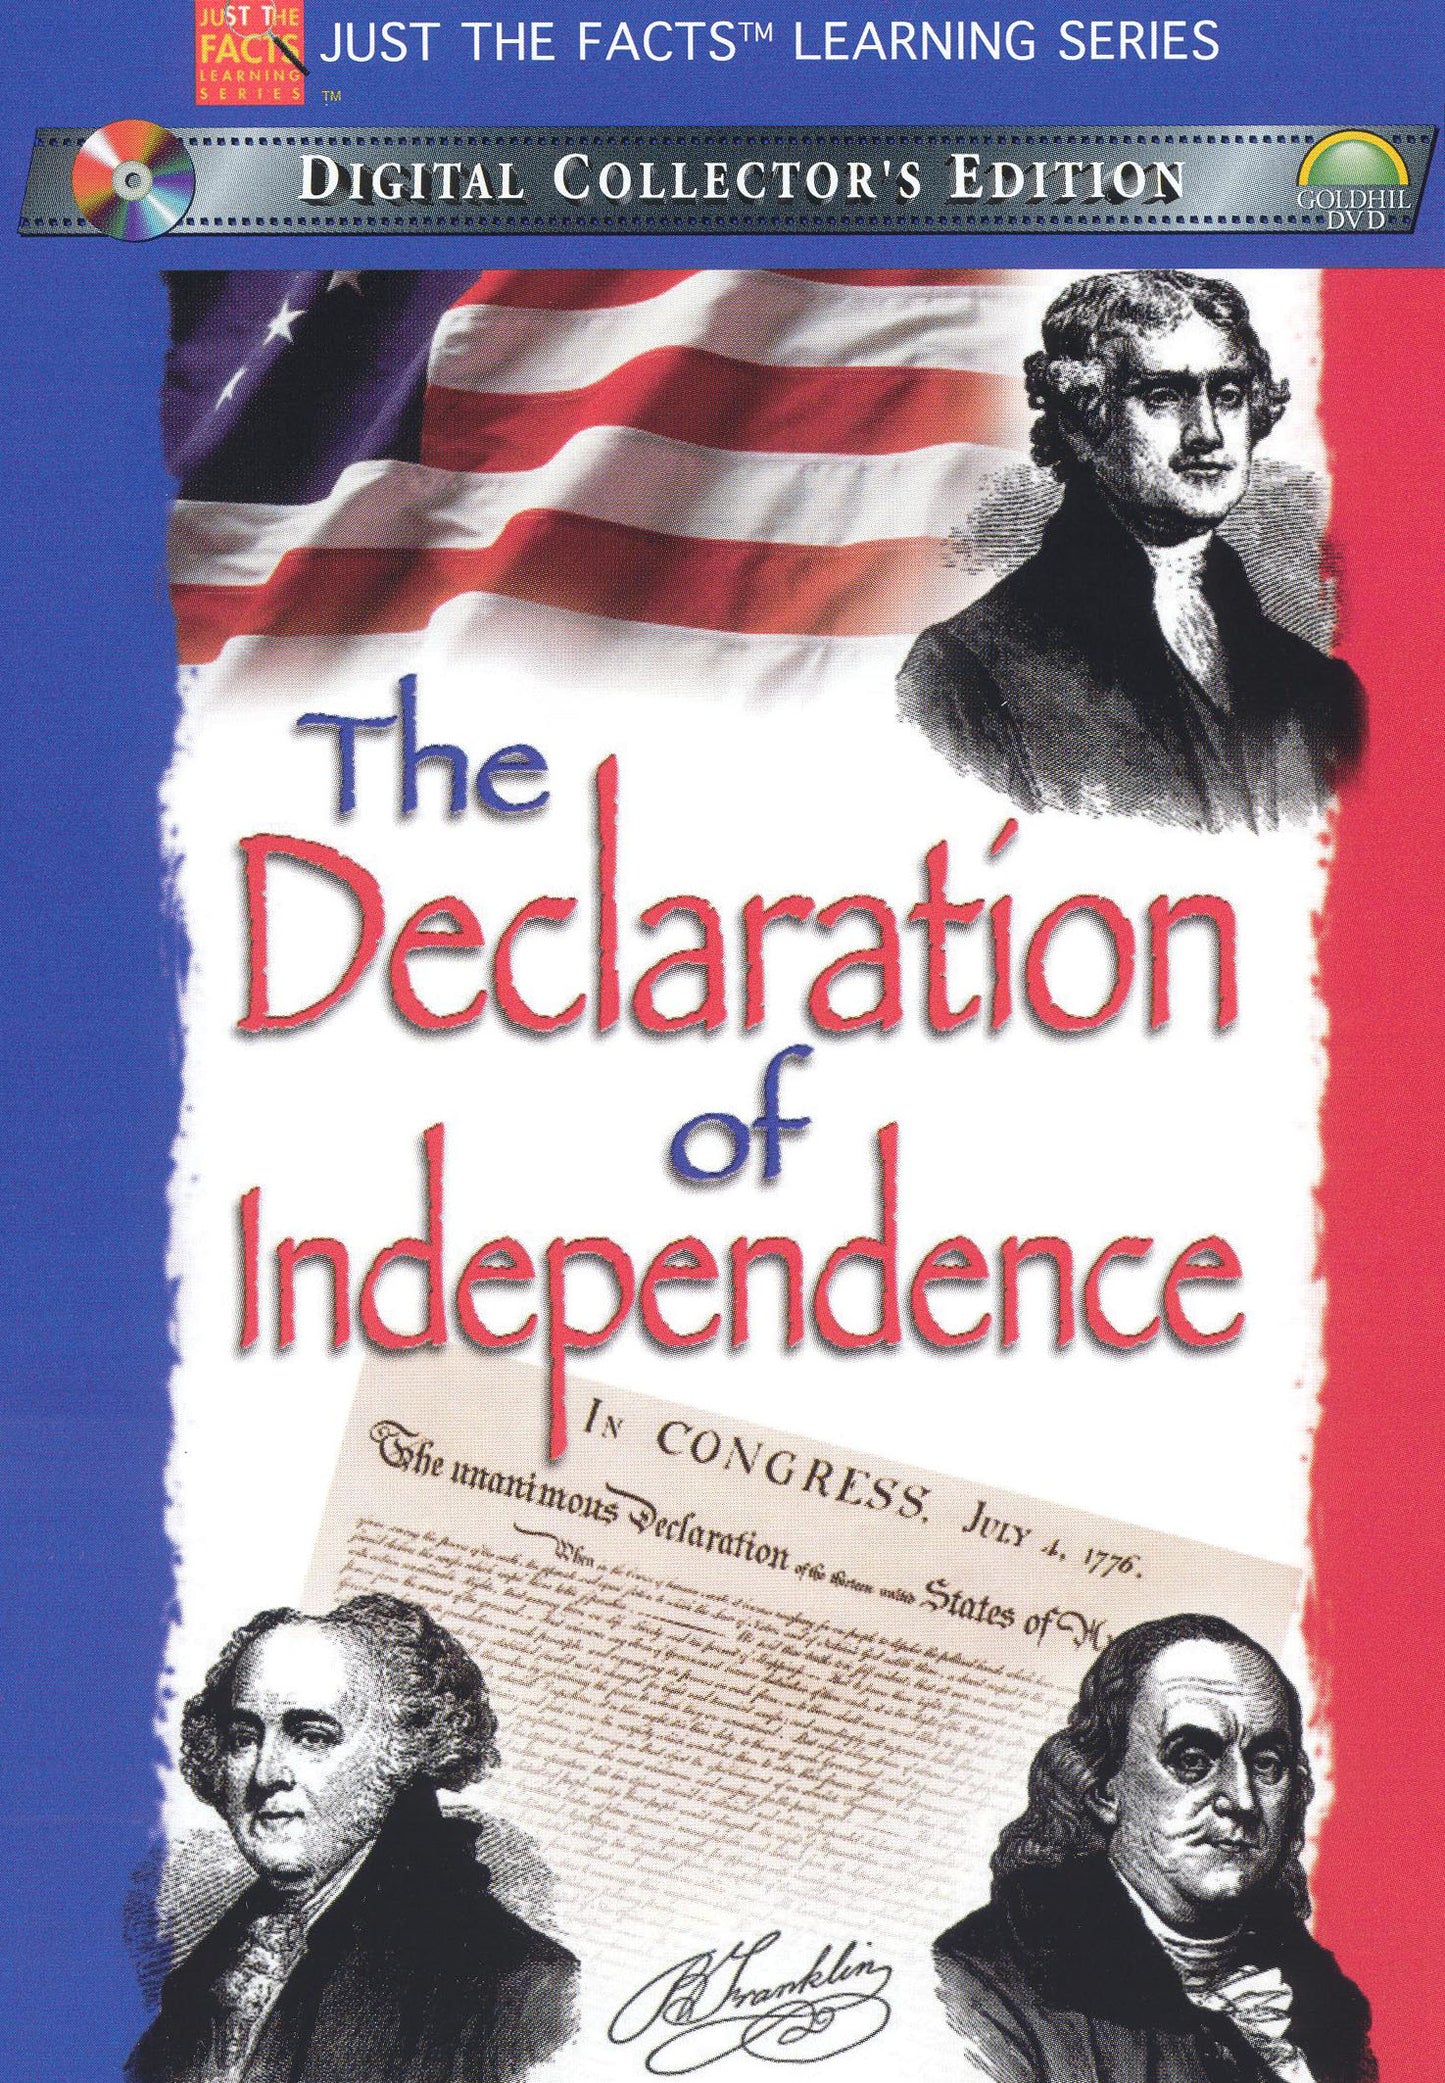 Just the Facts: The Declaration of Independence cover art